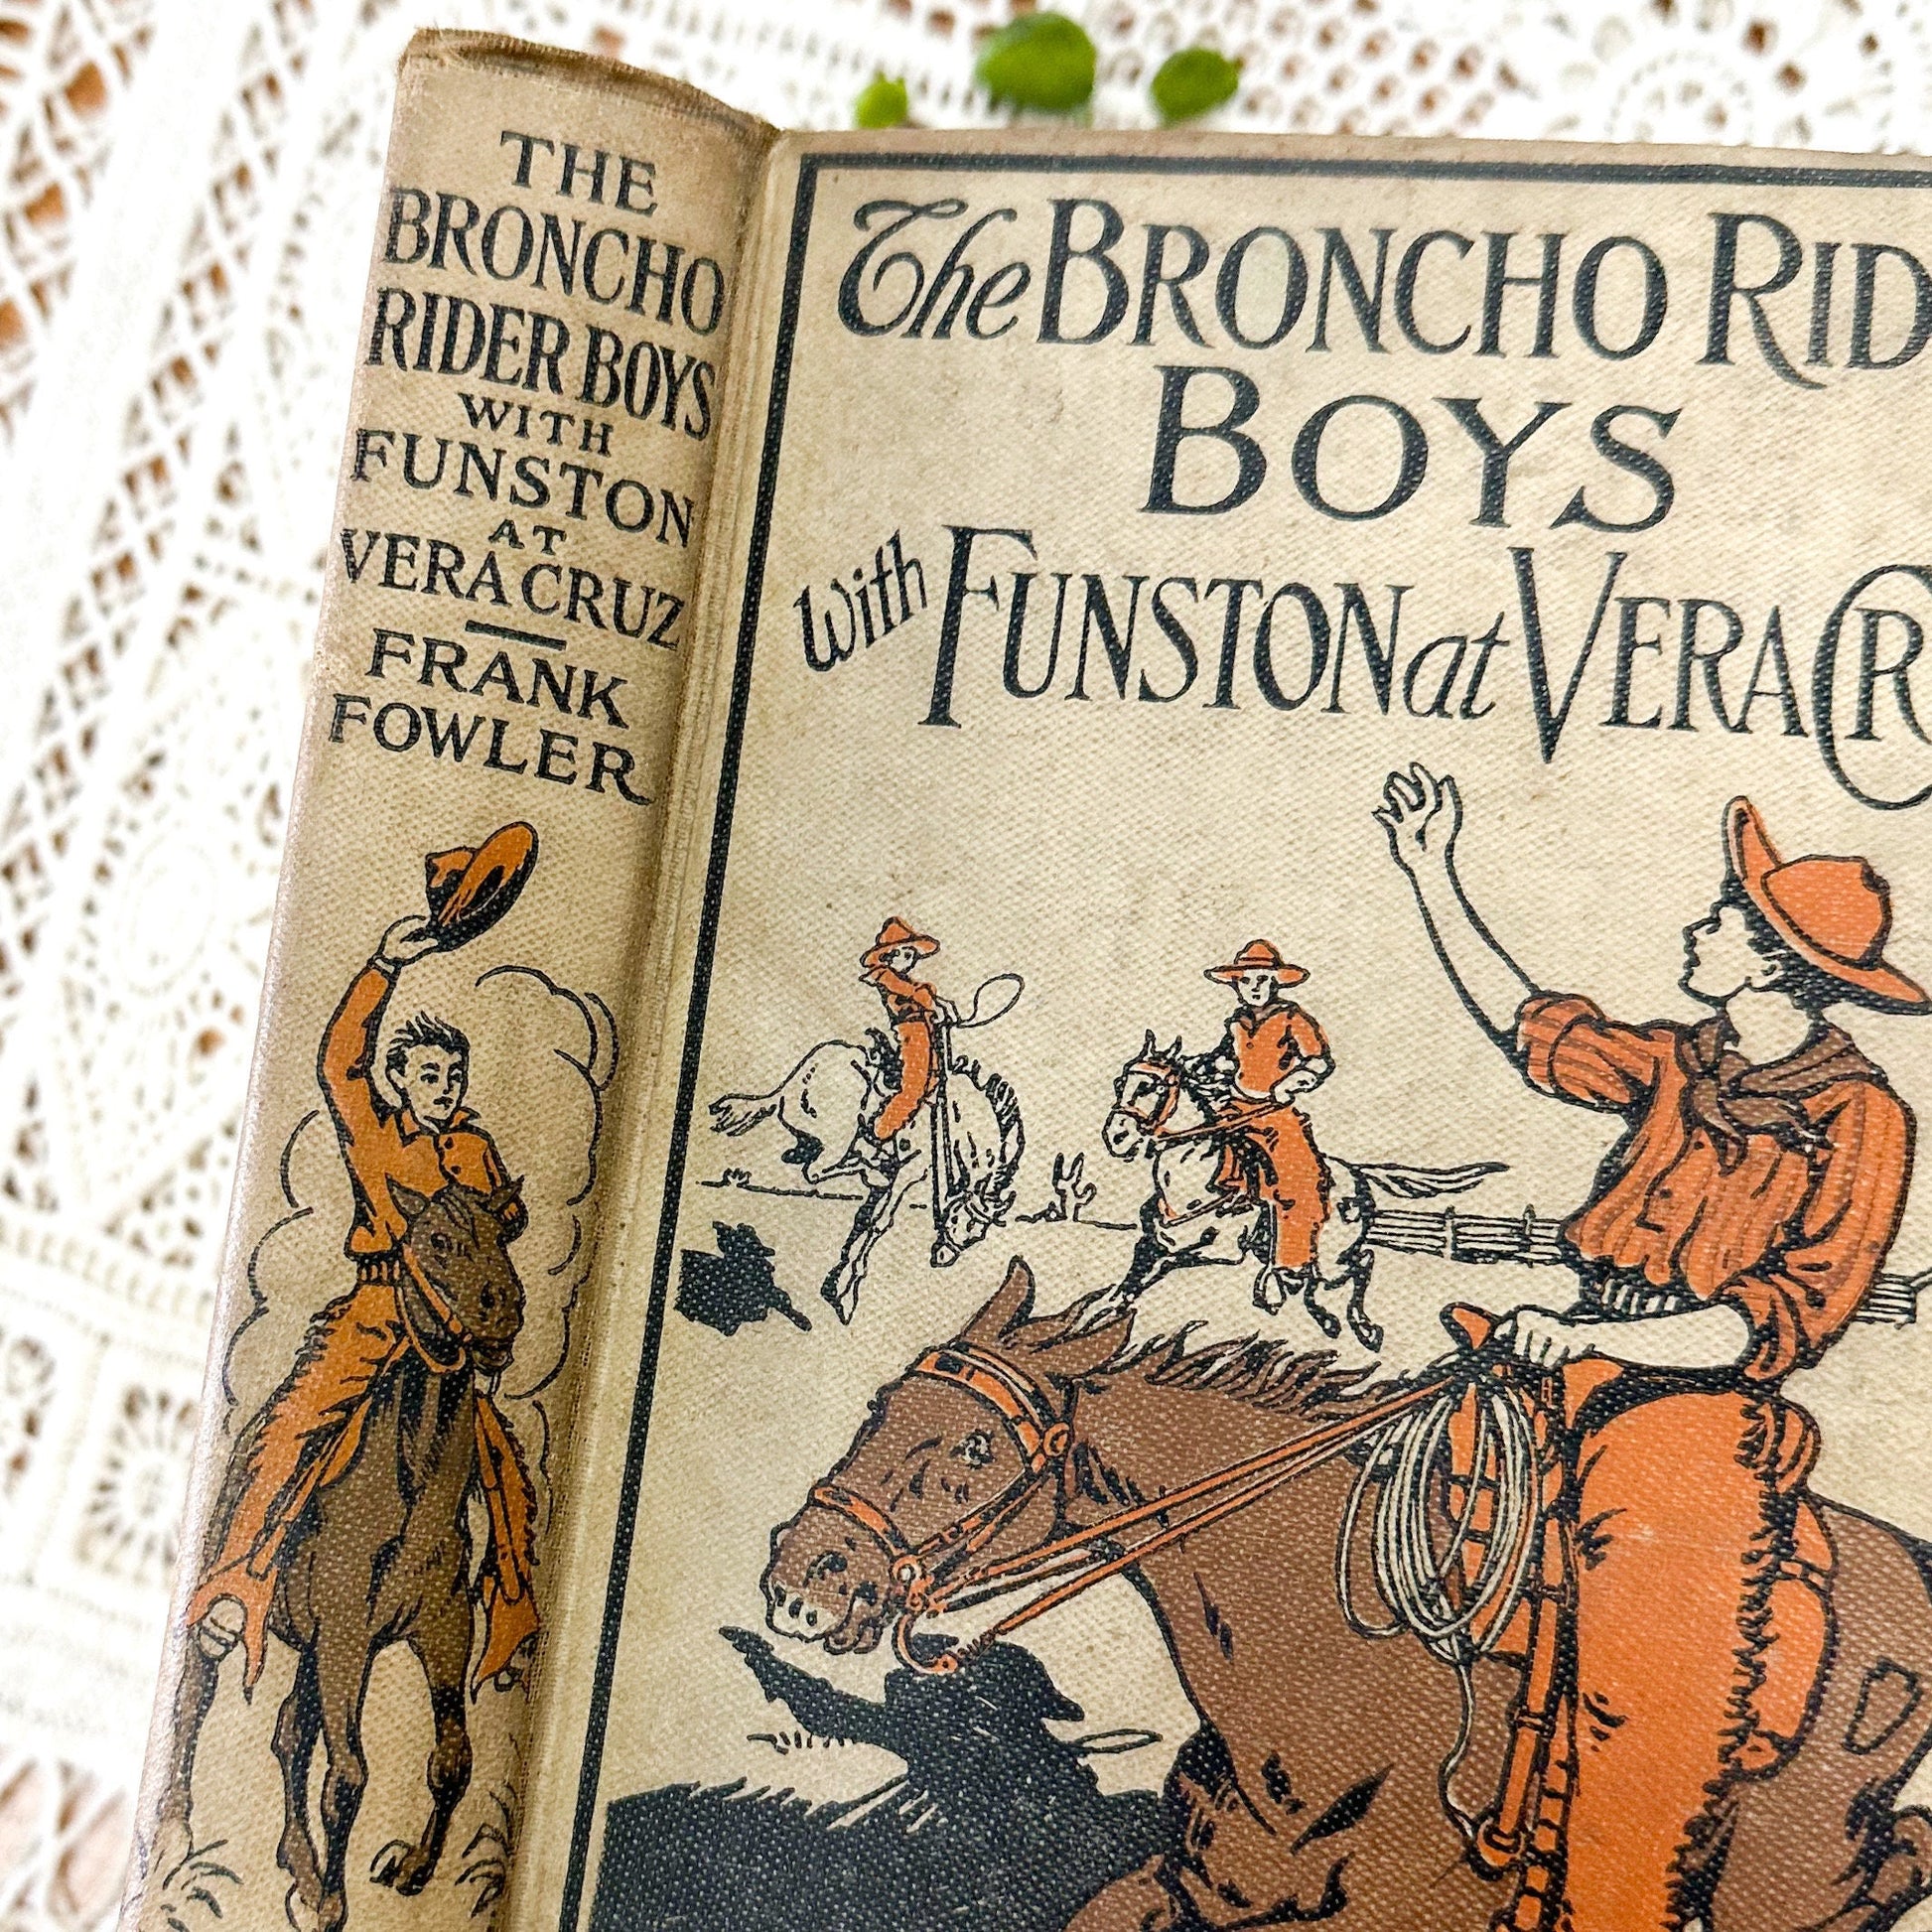 The Broncho Rider Boys with Funston at Vera Cruz by Frank Fowler